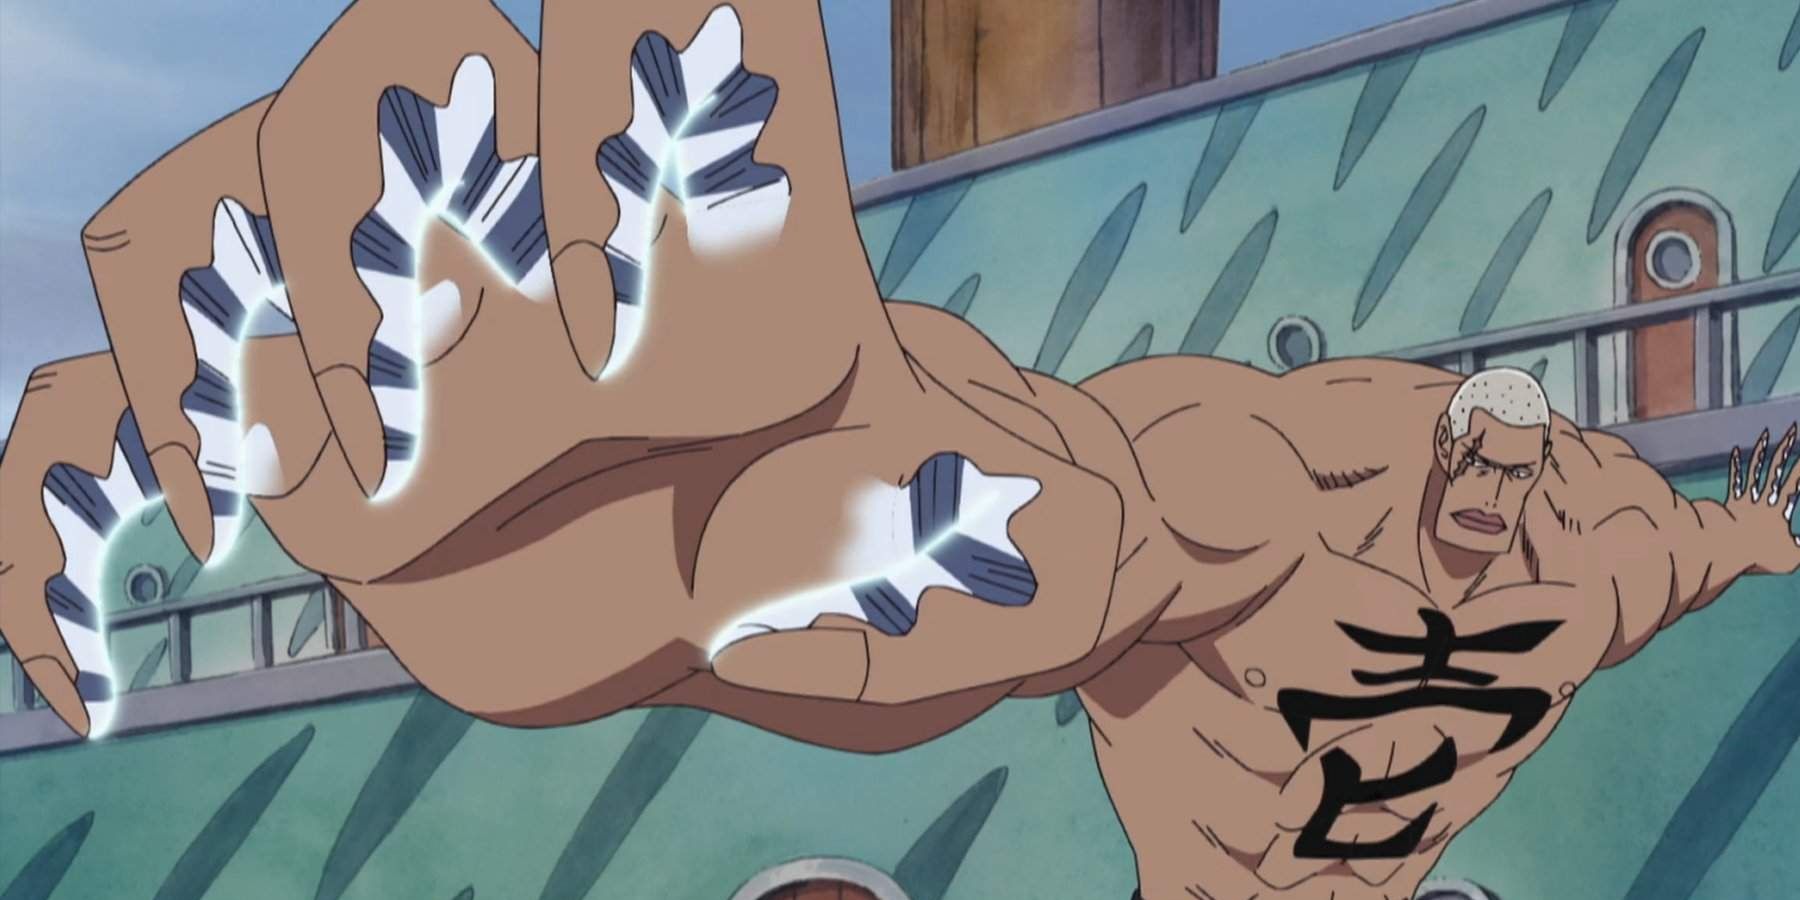 Mr One metal fingers from One Piece